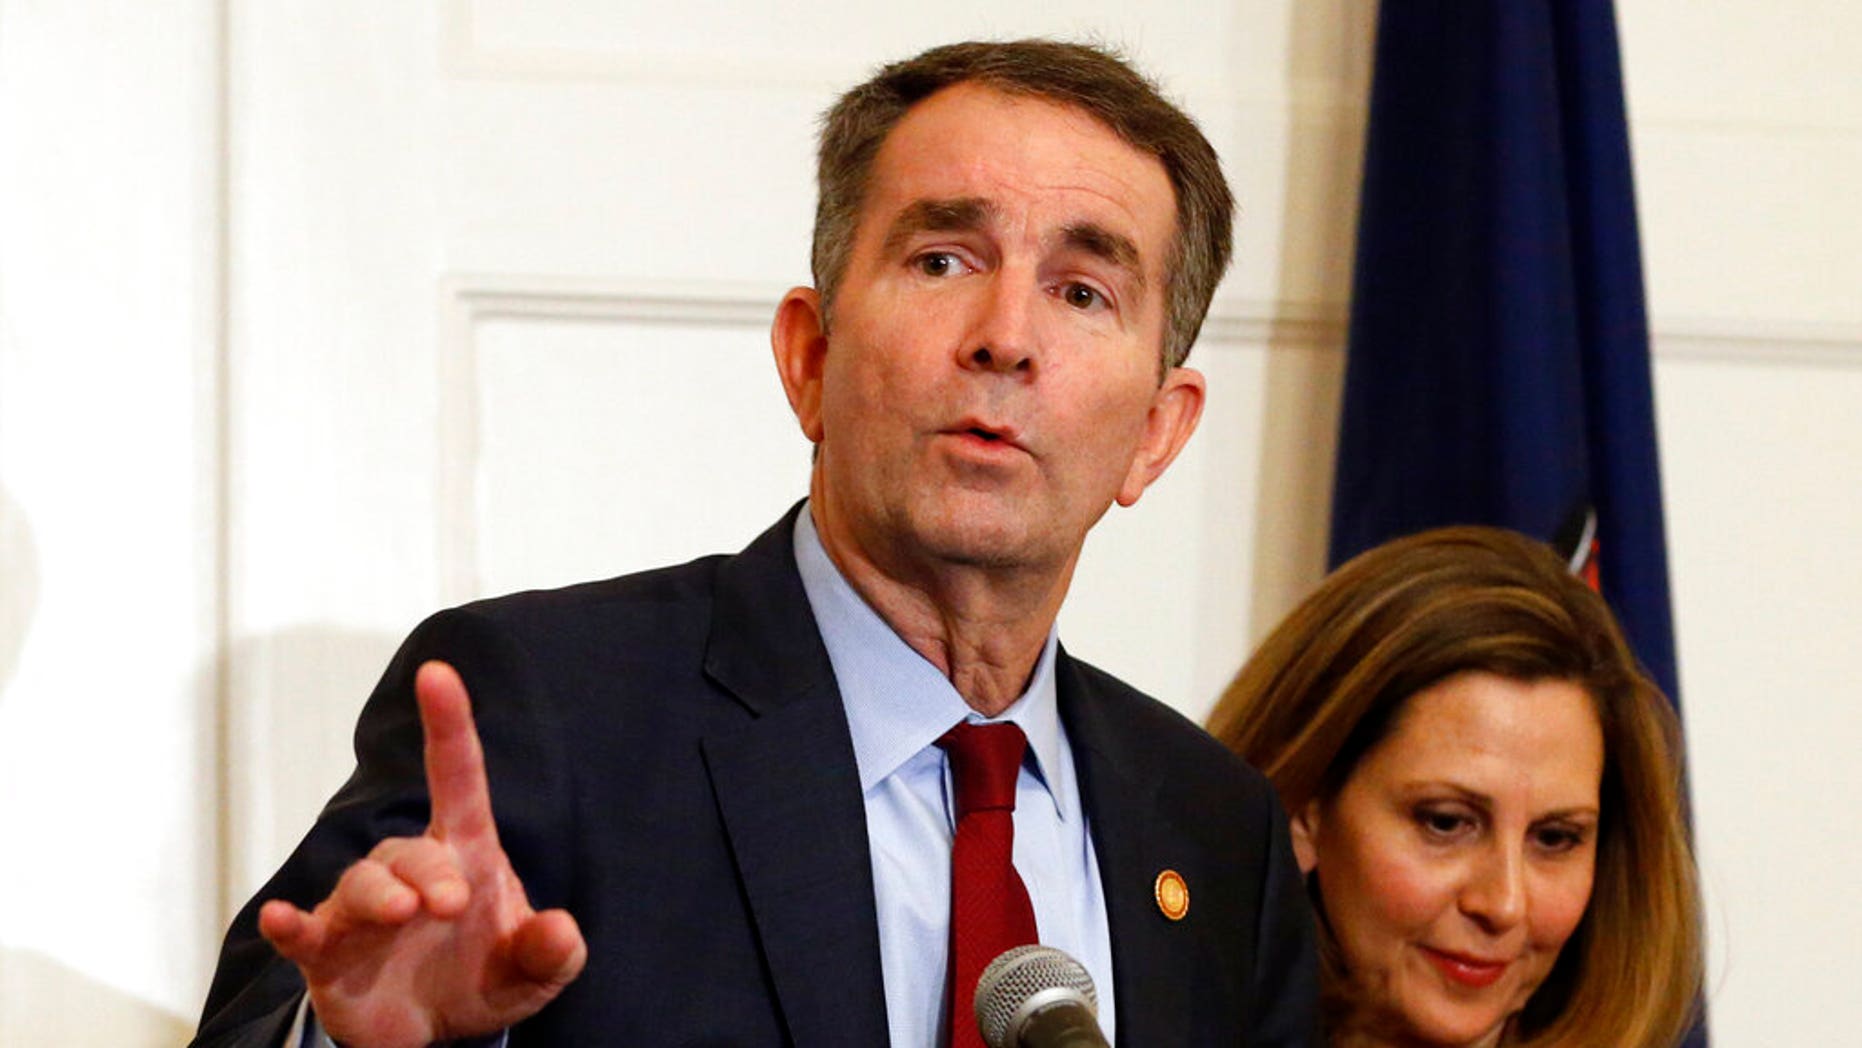 Pam Northarm, right, appears alongside her husband, Virginia Governor Ralph Northam, at a press conference held earlier this month. (AP Photo / Steve Helber)